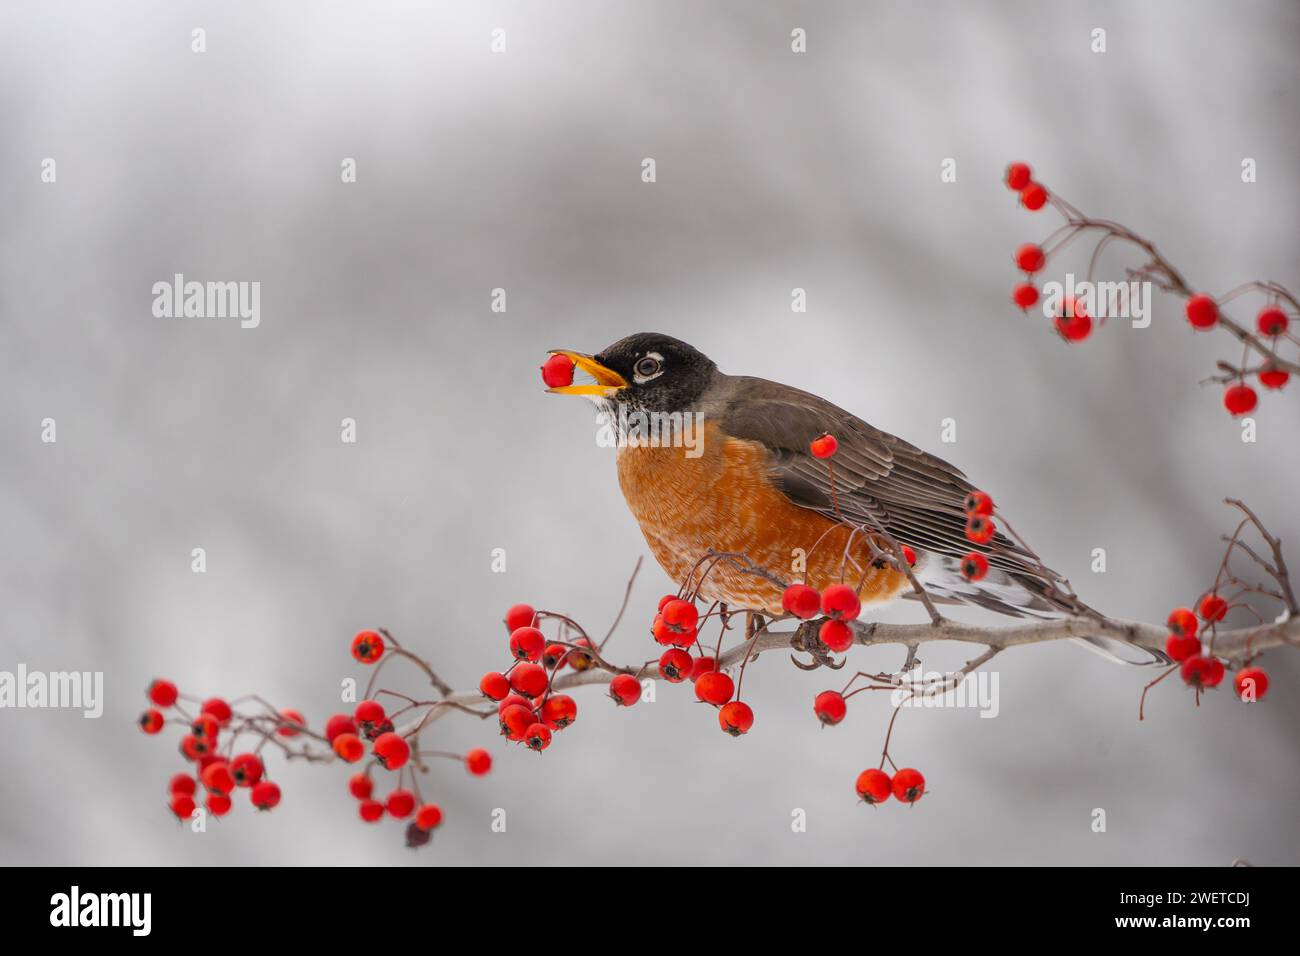 American Robin perched on tree branch eating red berries in winter Stock Photo